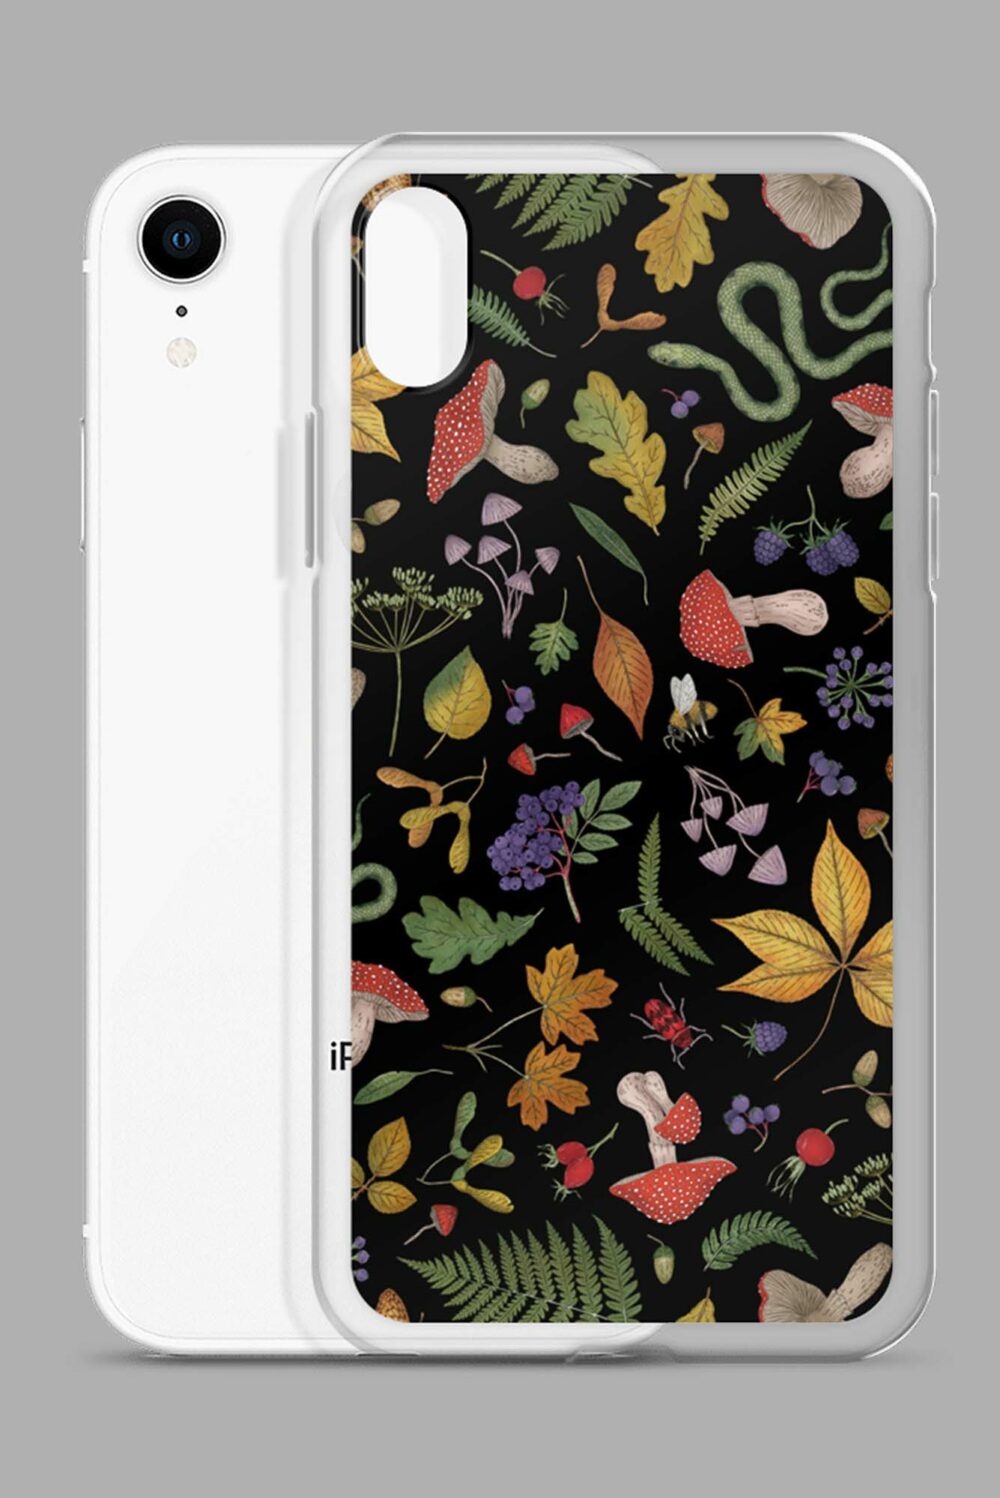 cosmic drifters hedge witch clear case for iphone iphone xr case with phone 64e2646b22870